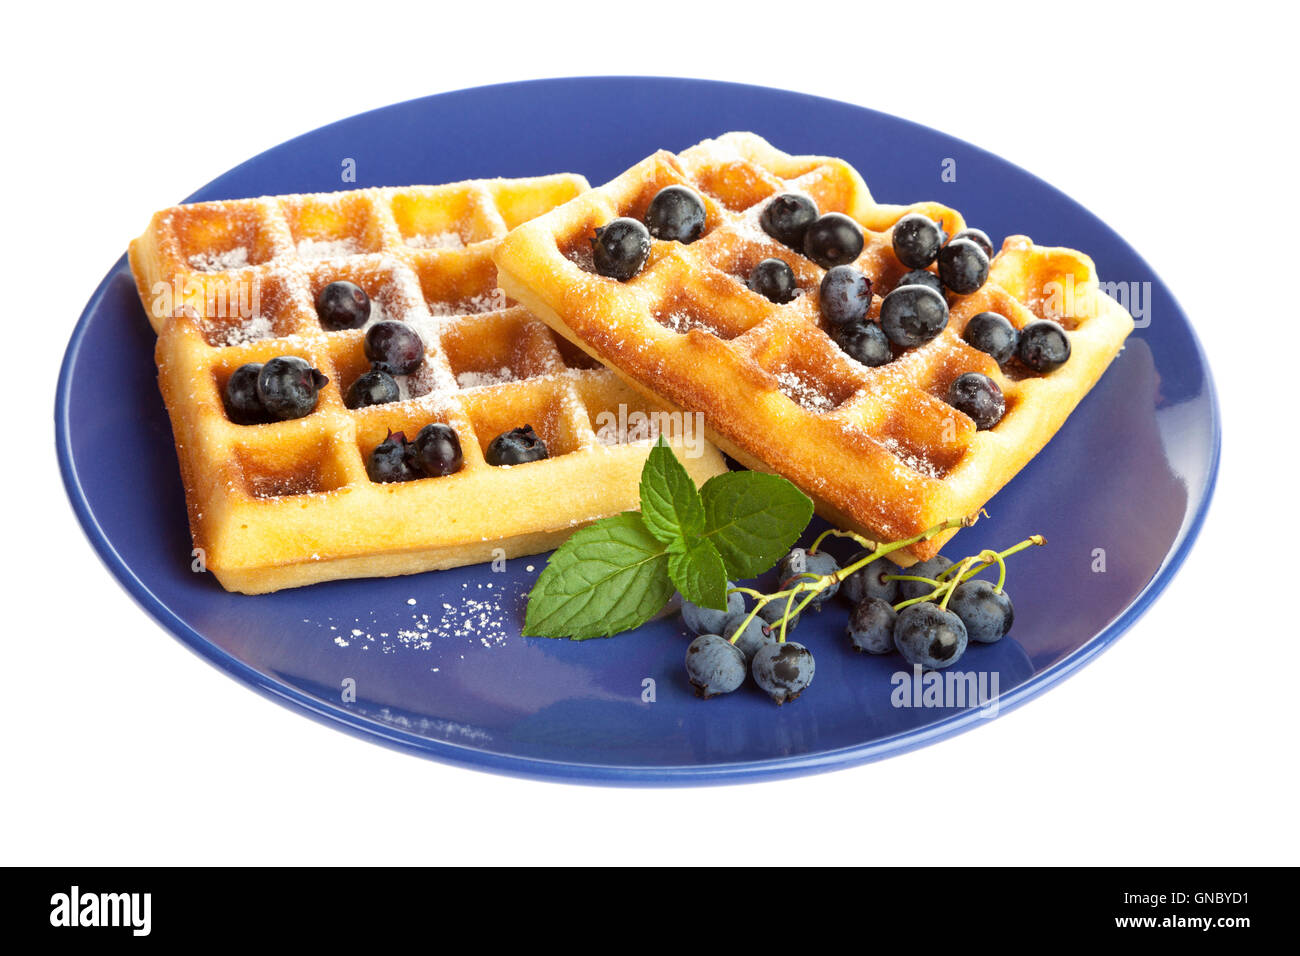 Belgian waffles with blueberries and powdered sugar on blue plate isolated on white background Stock Photo